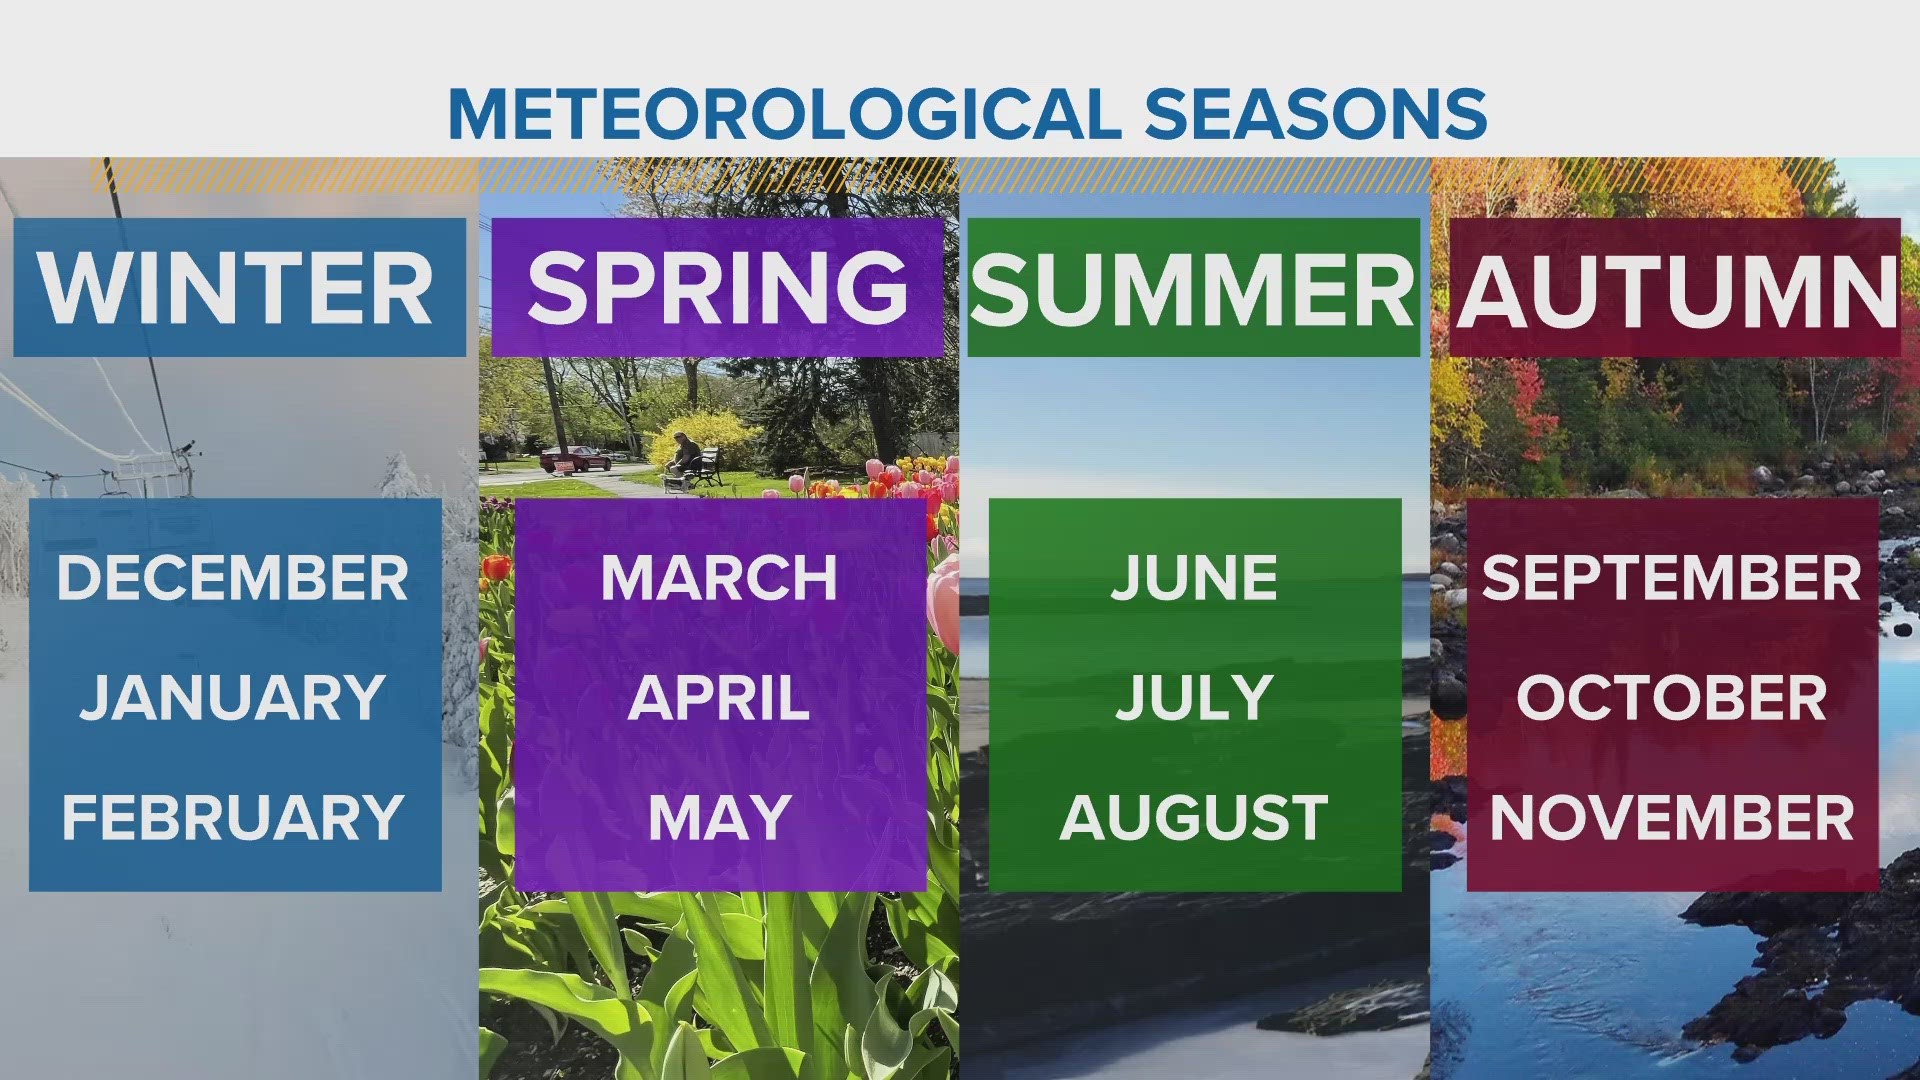 Meteorological seasons differ from astronomical seasons. Here's what that means.